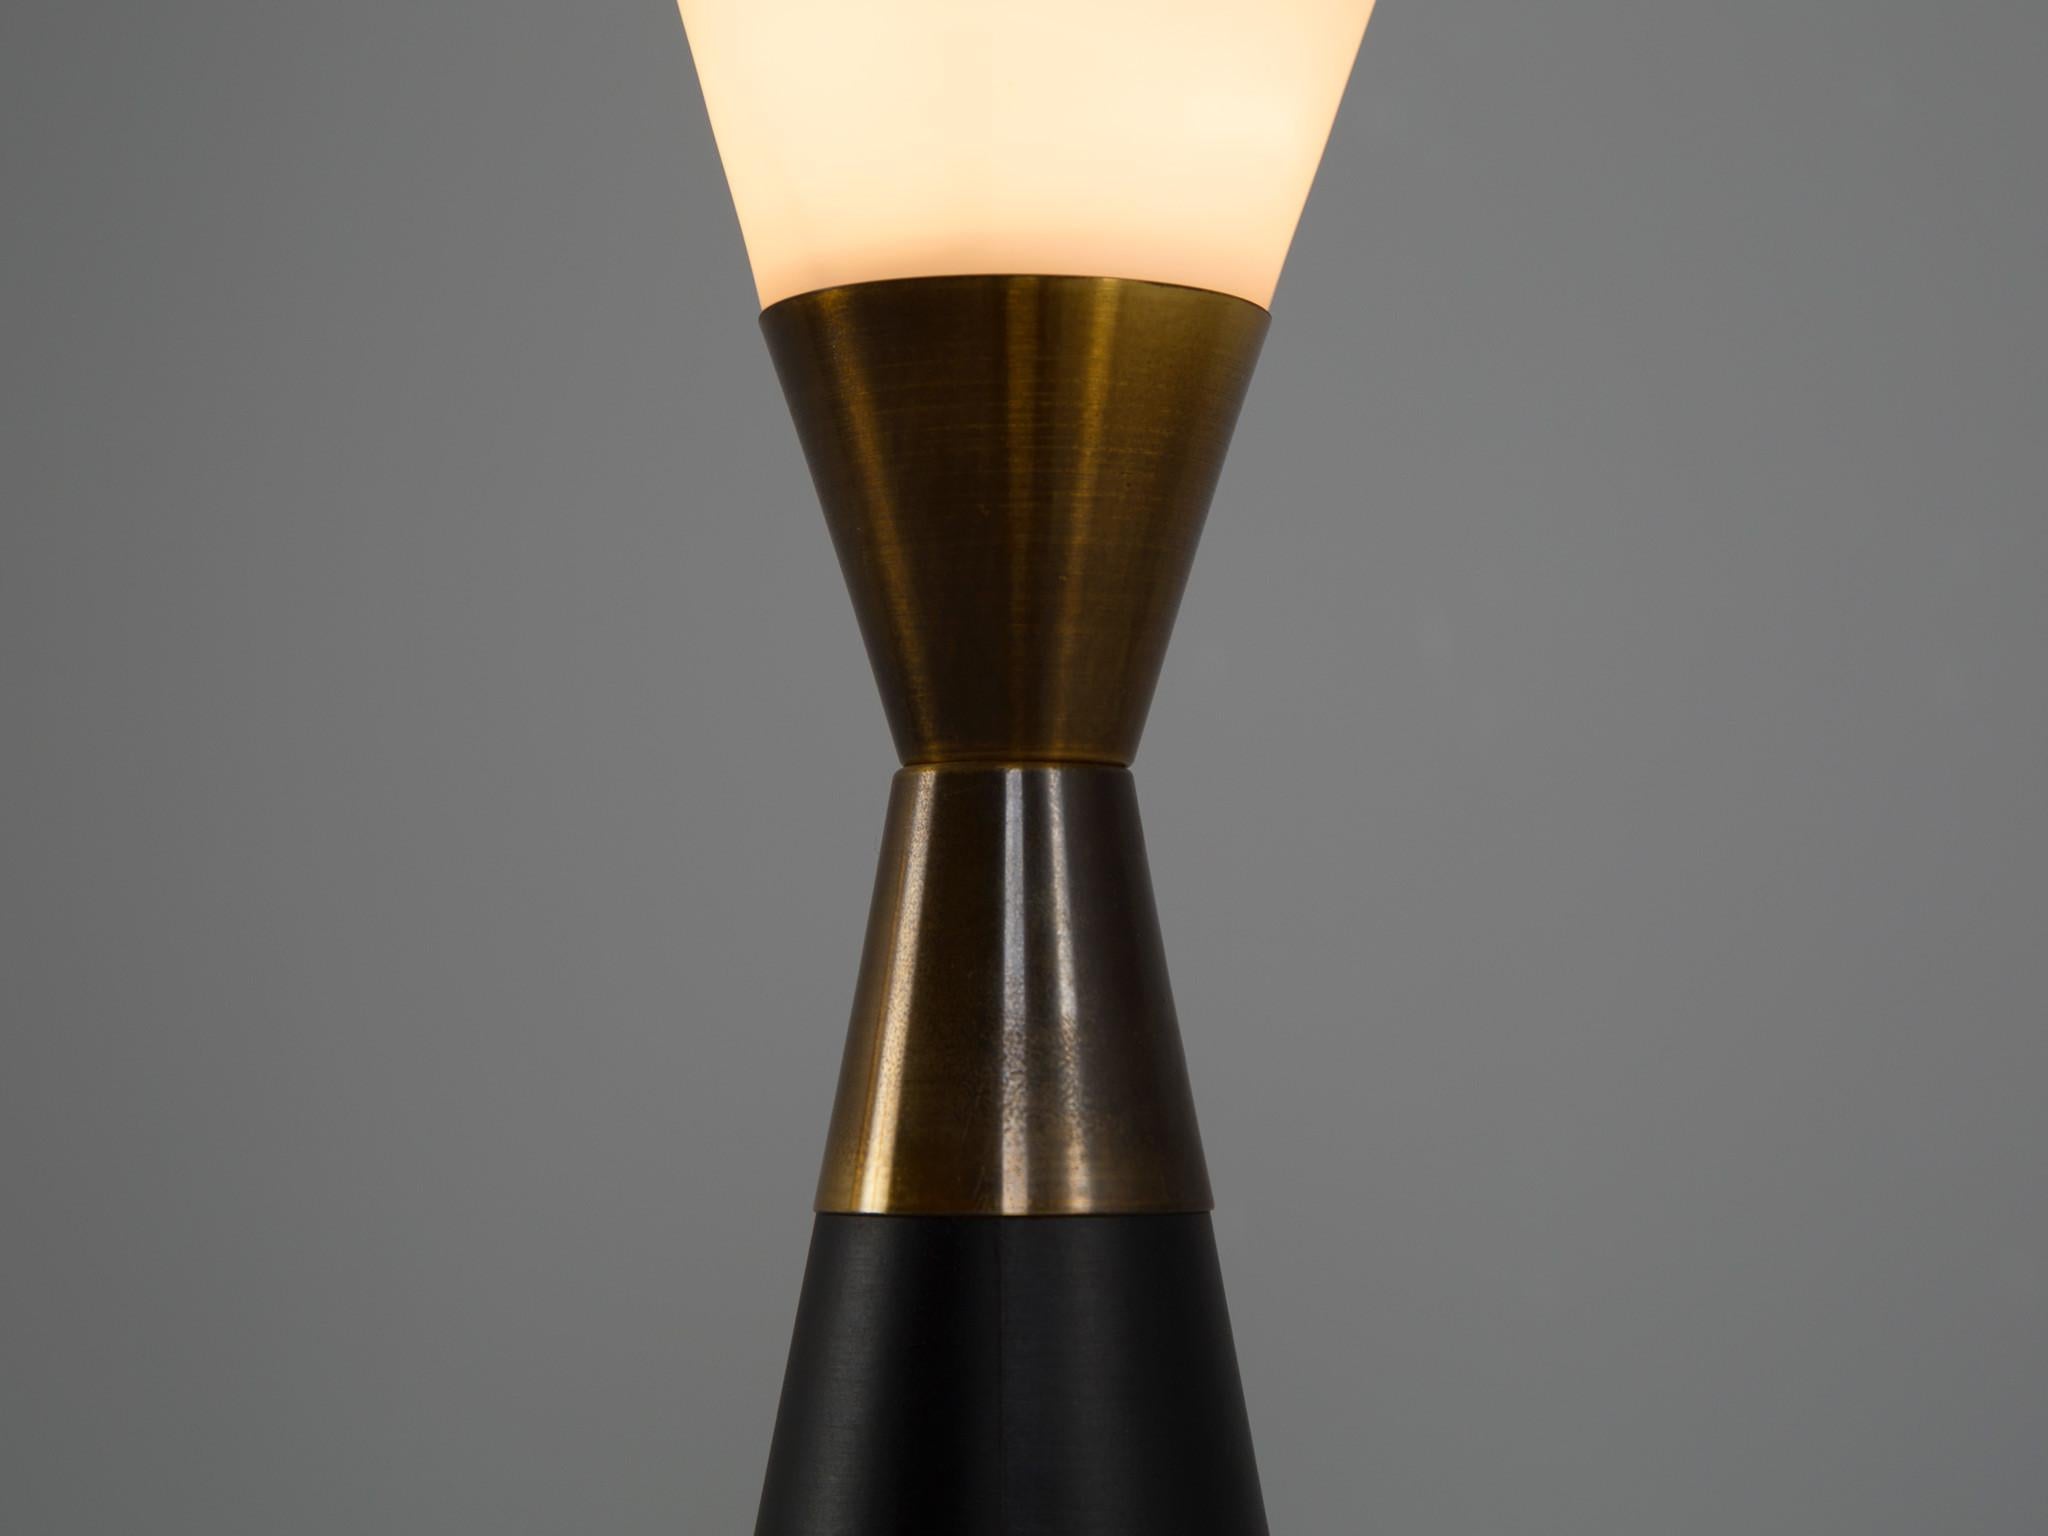 Table lamp, glass, brass, Italy, 1961

Very sculptural table lamp made out of opaline glass and brass. This unique shaped lamp is not only beautiful due to its form. Moreover, it is stunning thanks to the combination of white, opaline glass, the